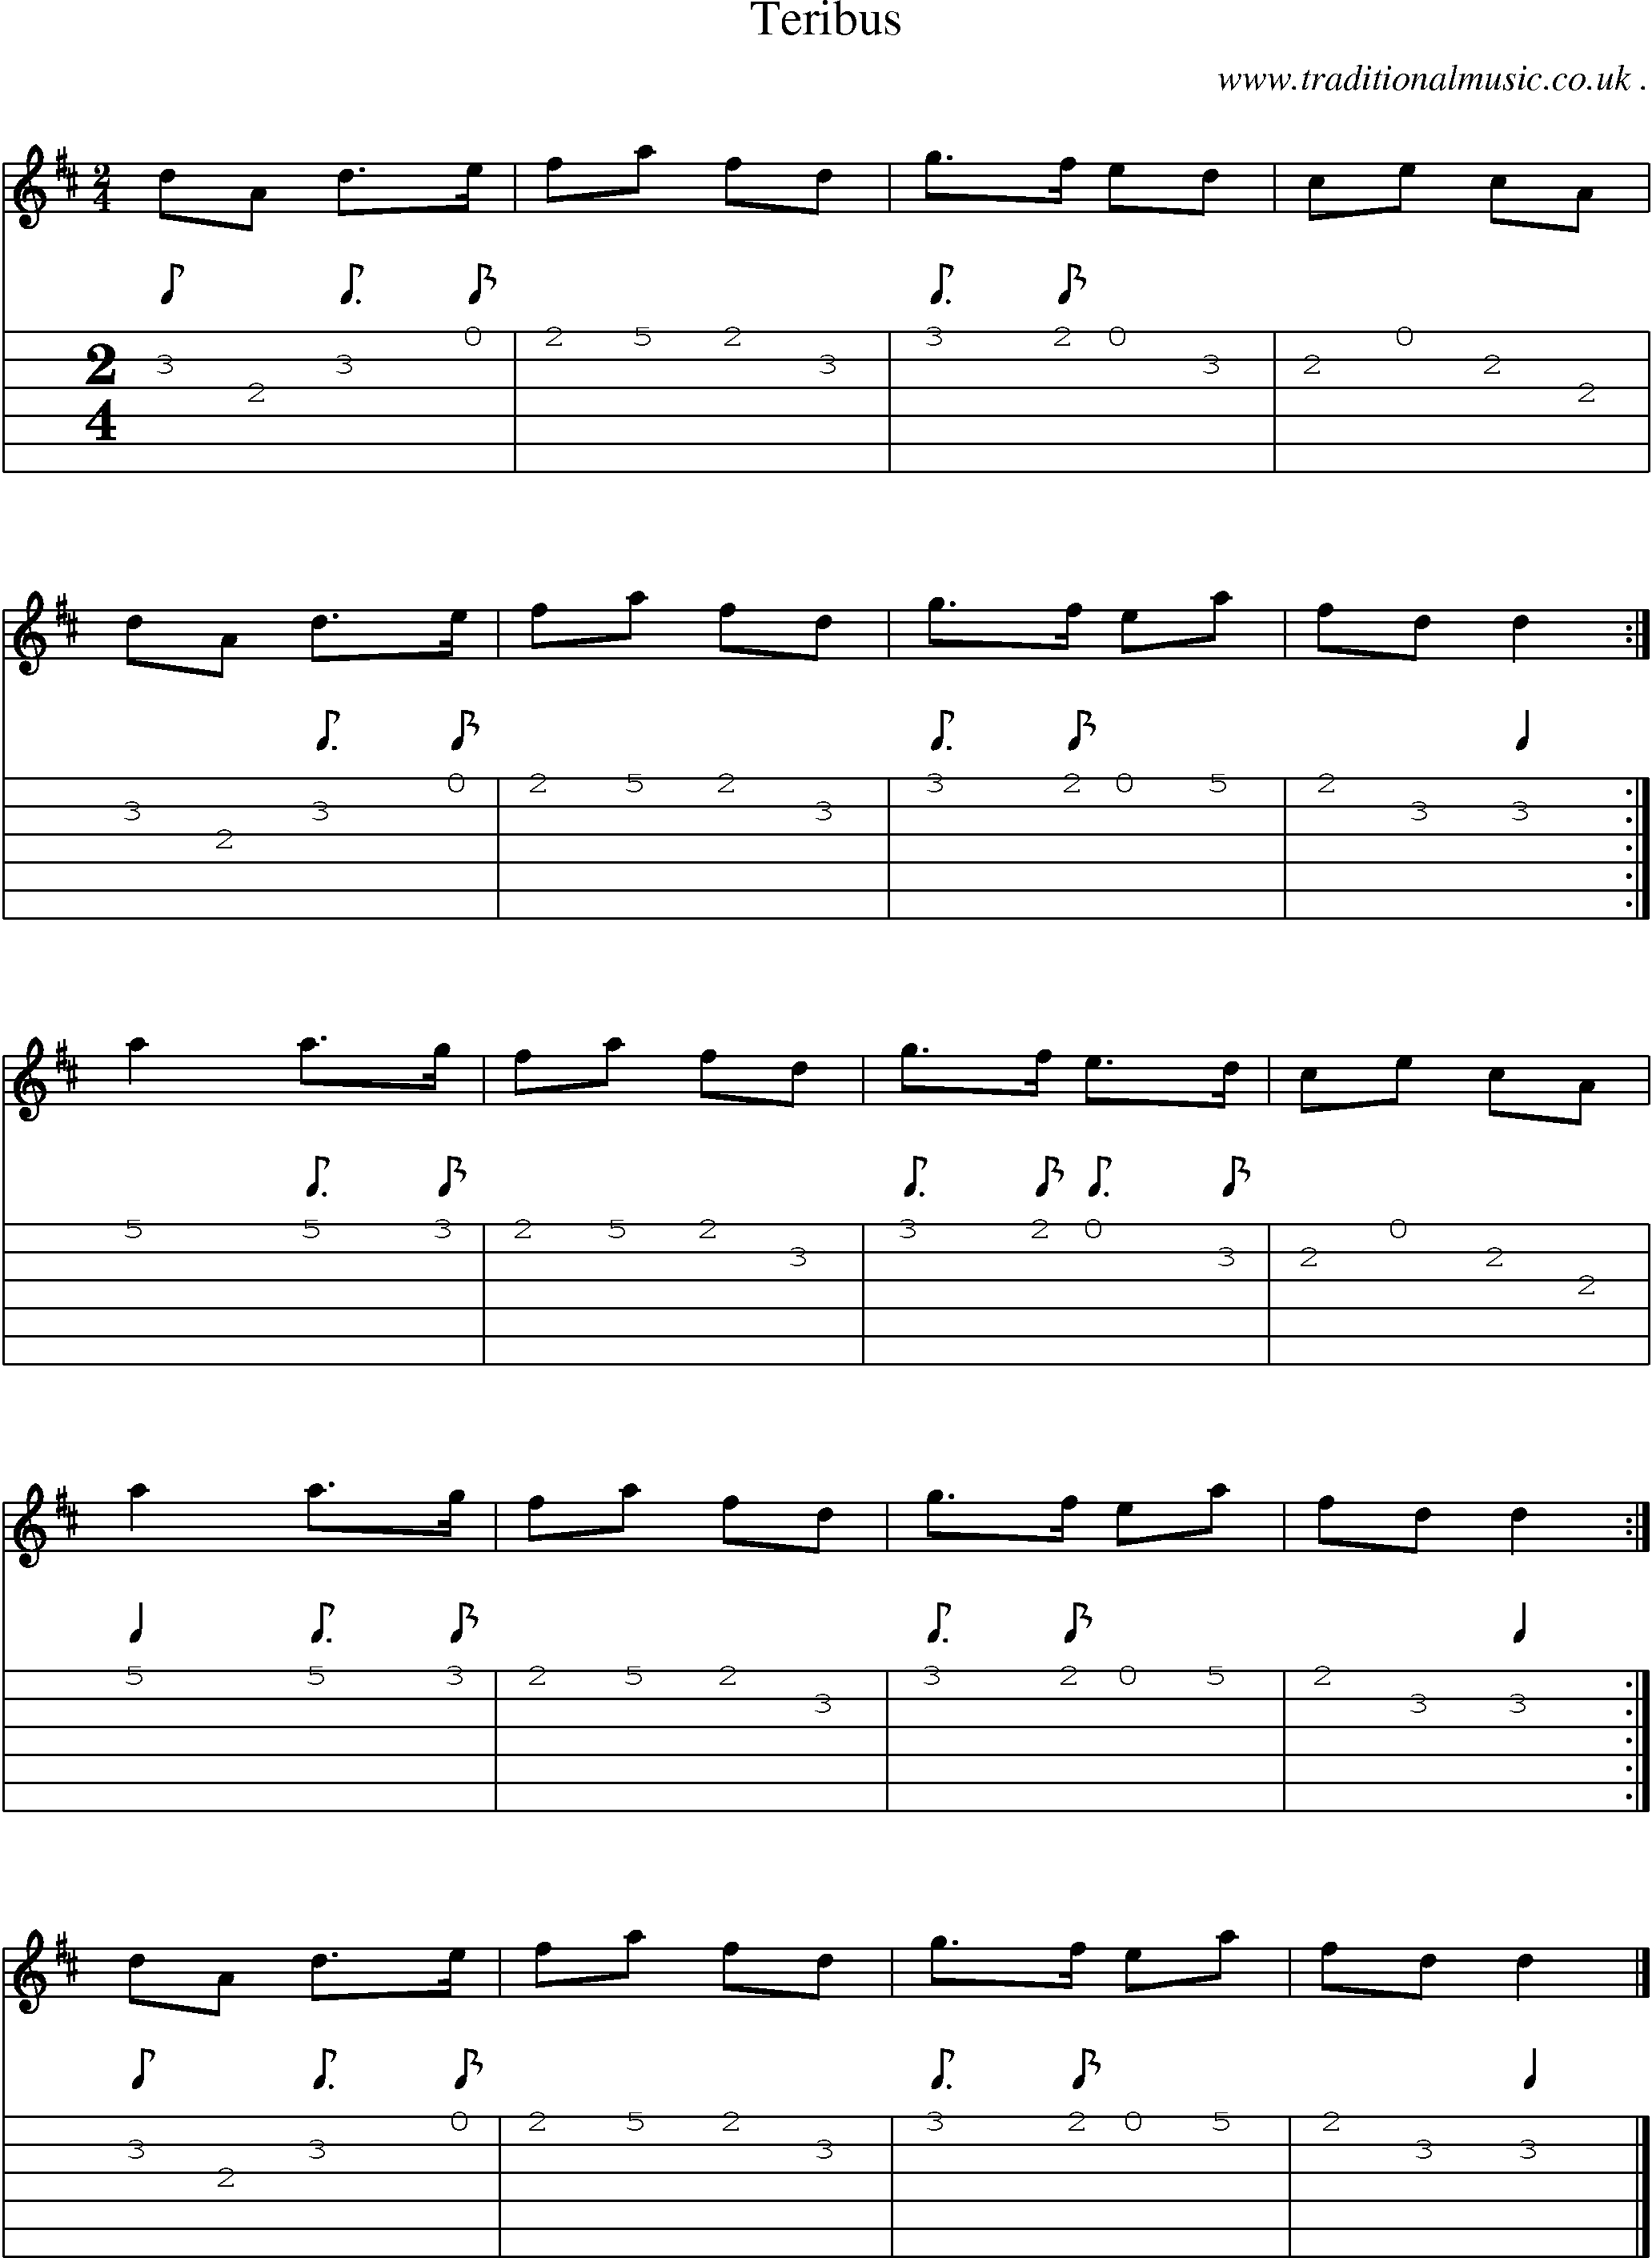 Sheet-music  score, Chords and Guitar Tabs for Teribus